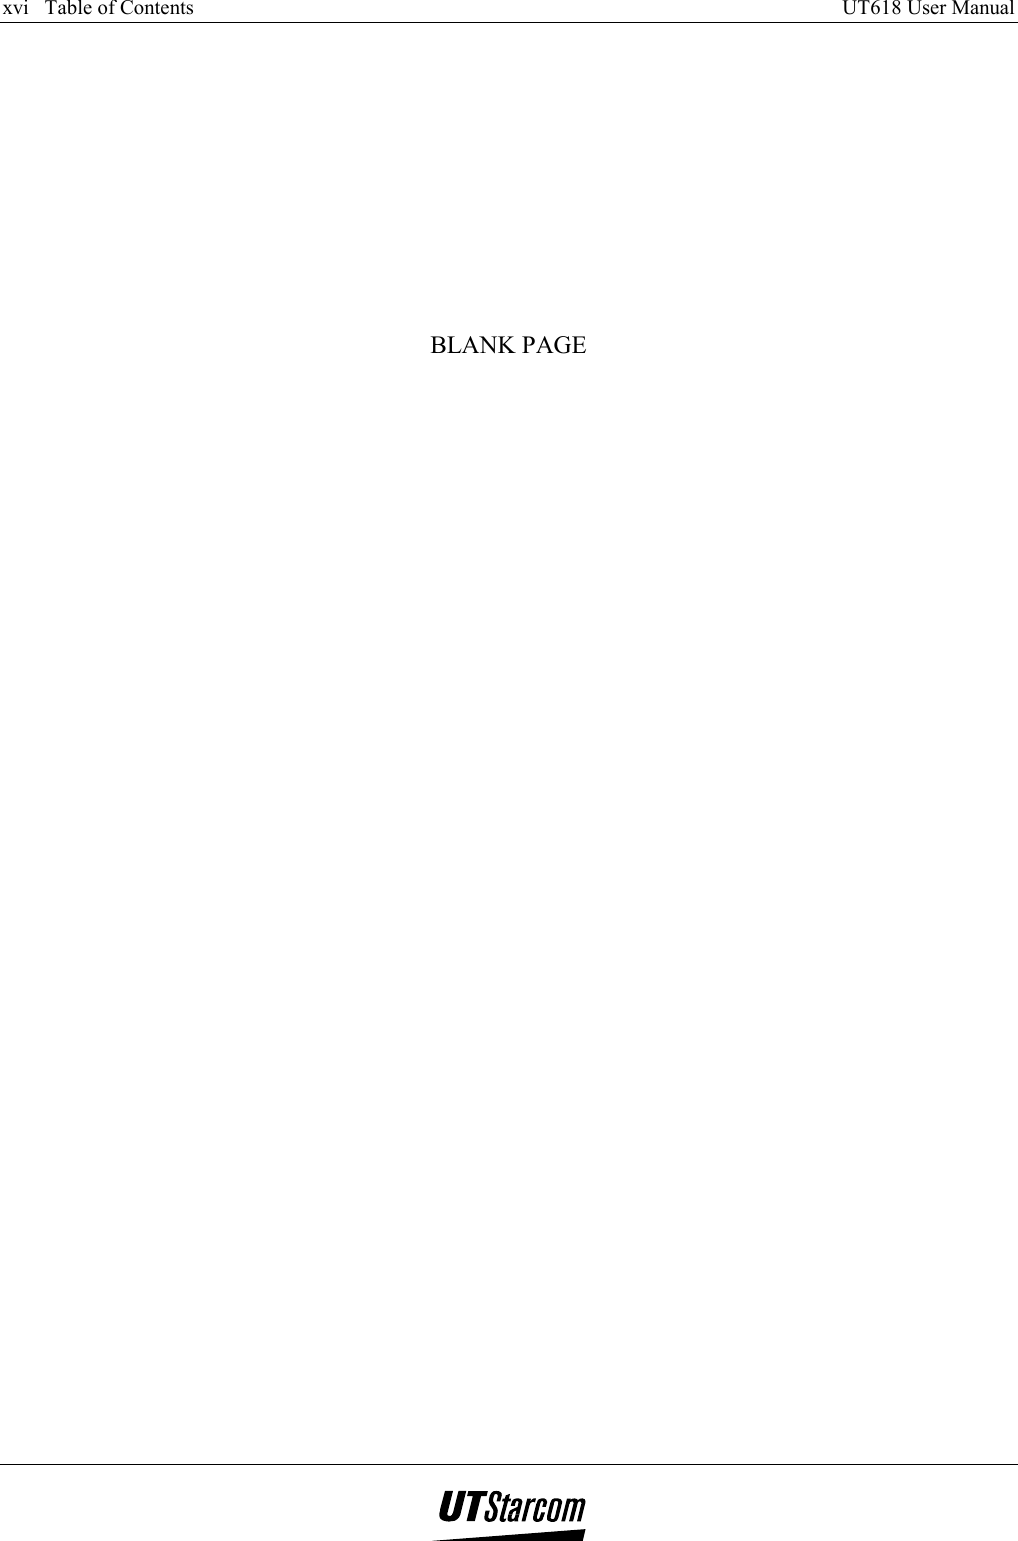 xvi   Table of Contents     UT618 User Manual         BLANK PAGE 